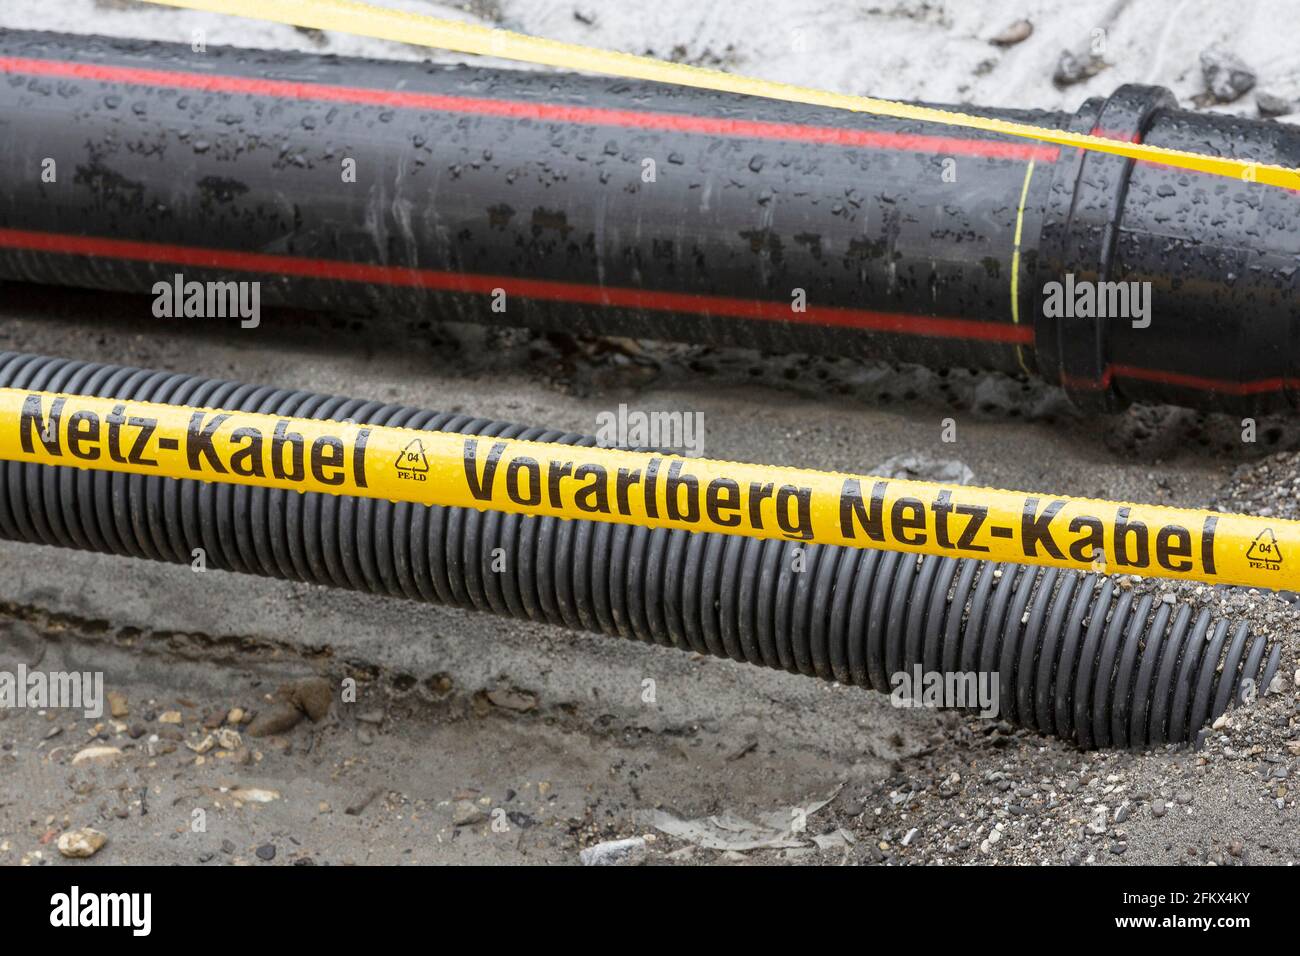 Vorarlberg Network Cables, Piping, Austria Stock Photo